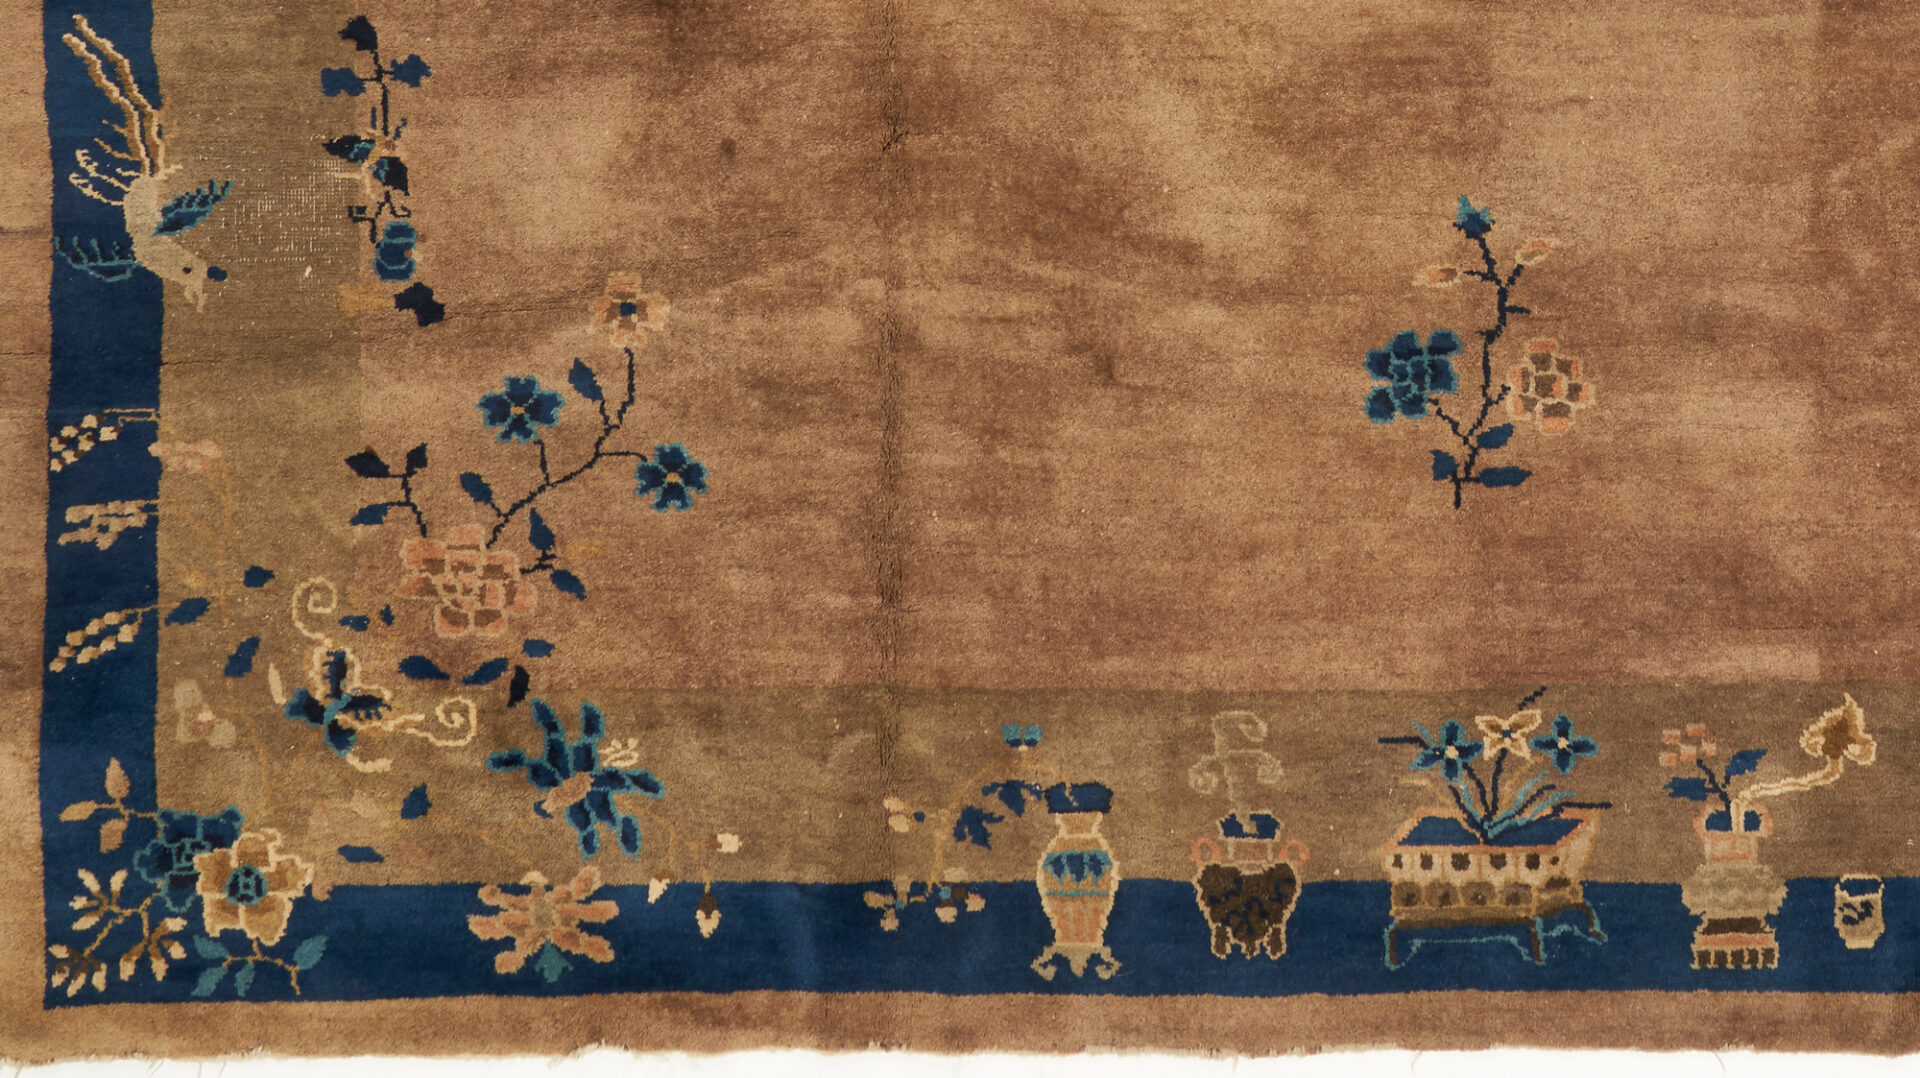 Lot 40: Chinese Art Deco Rug